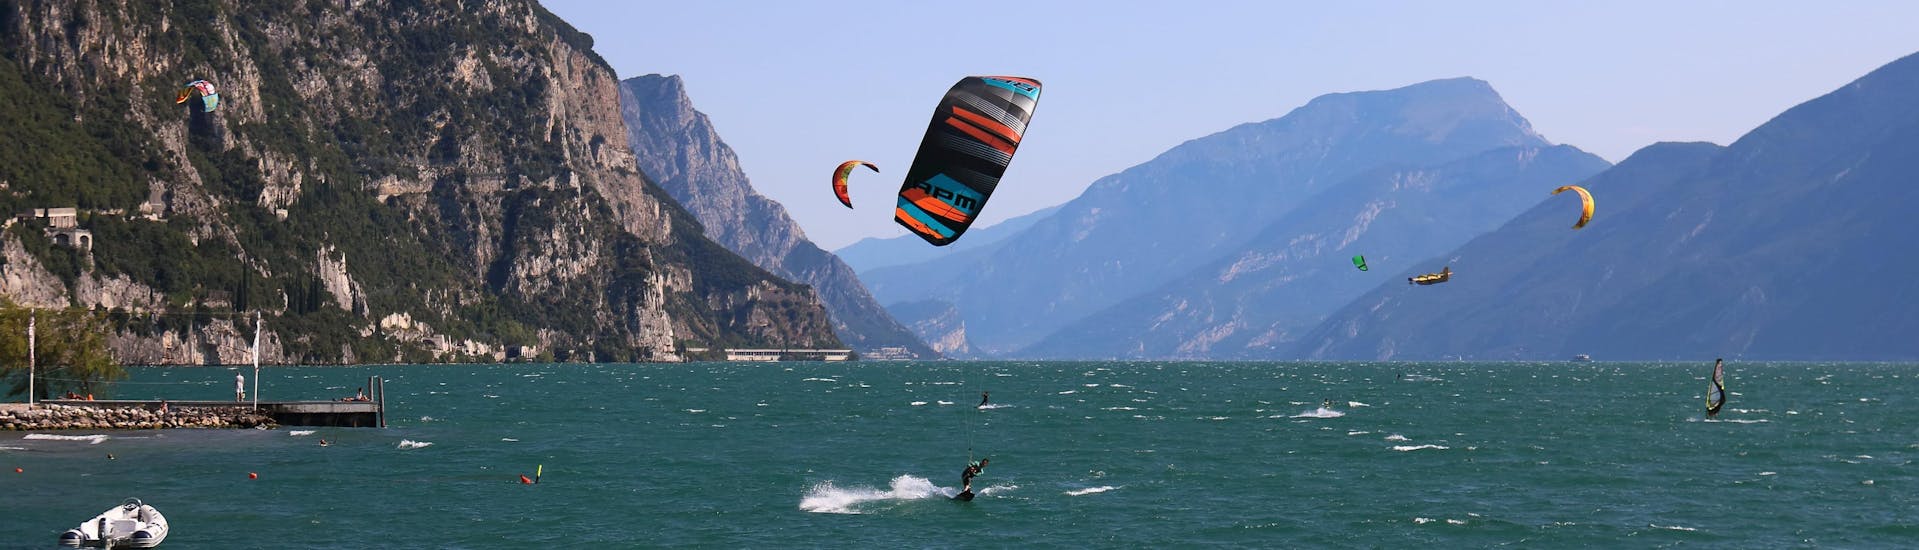 A young woman surfing in the clear blue waters of the surfing and SUP hotspot of Lake Garda.